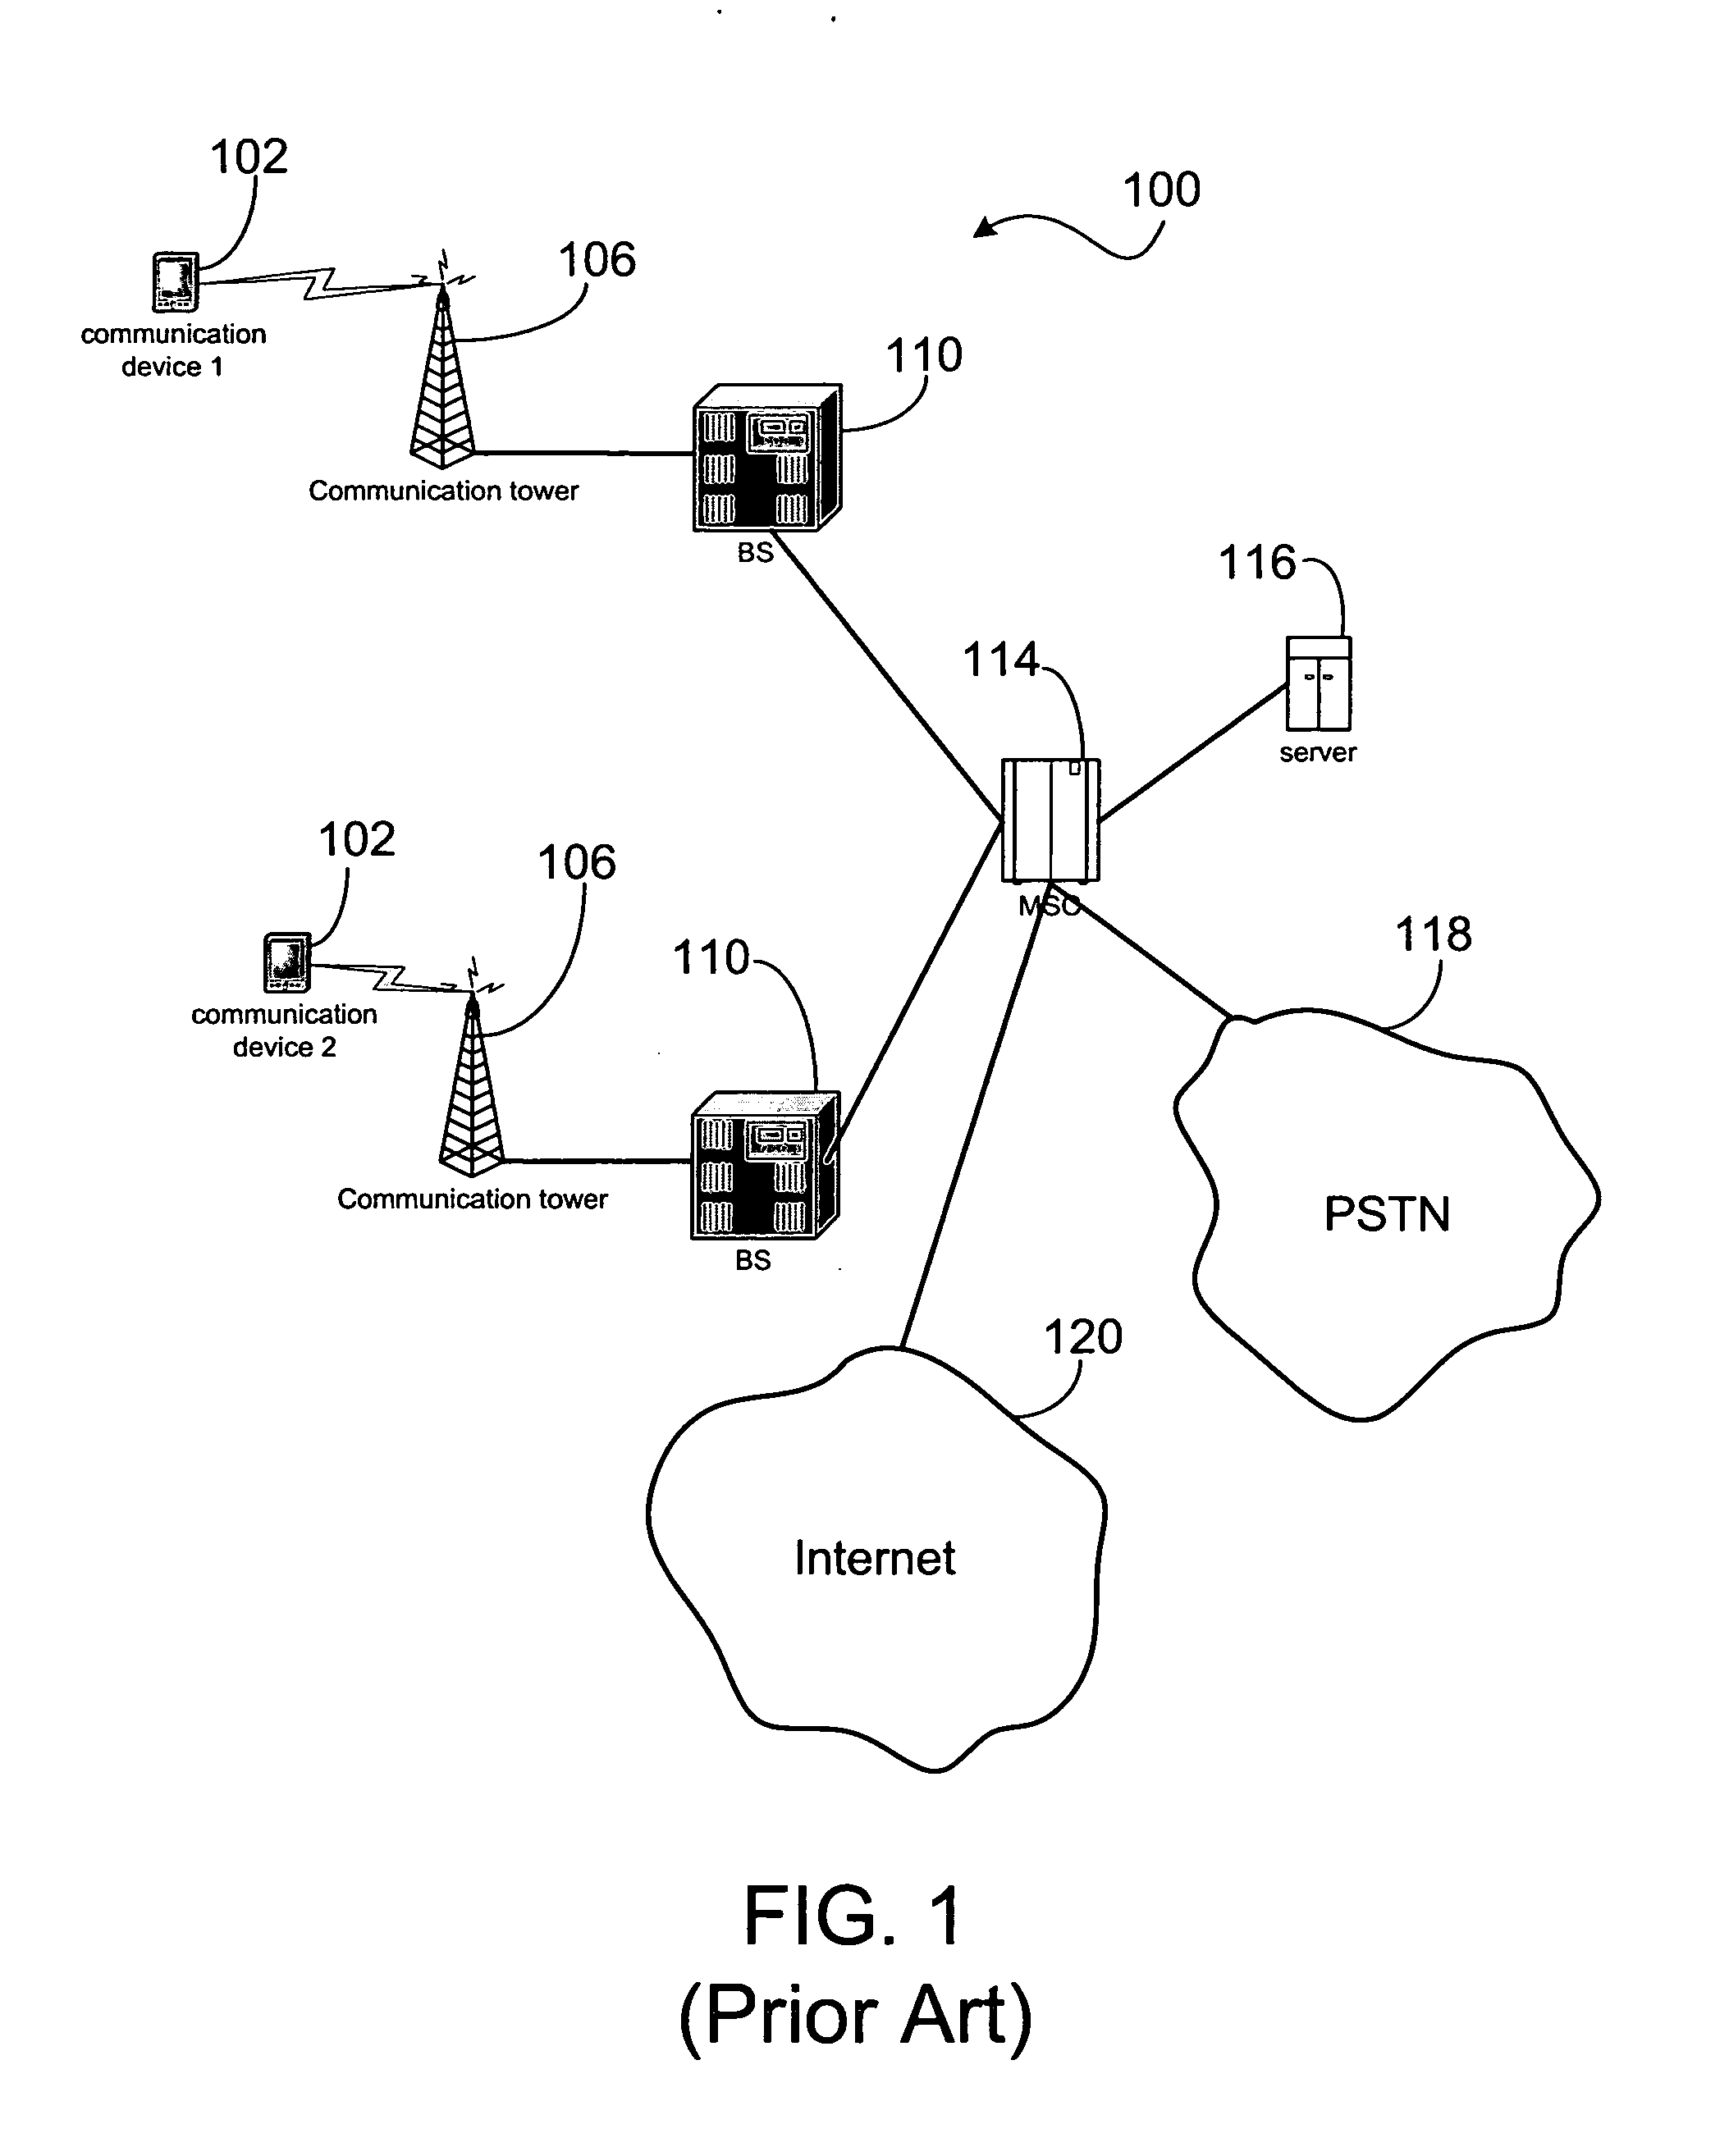 System and method for providing an early notification when paging a wireless device